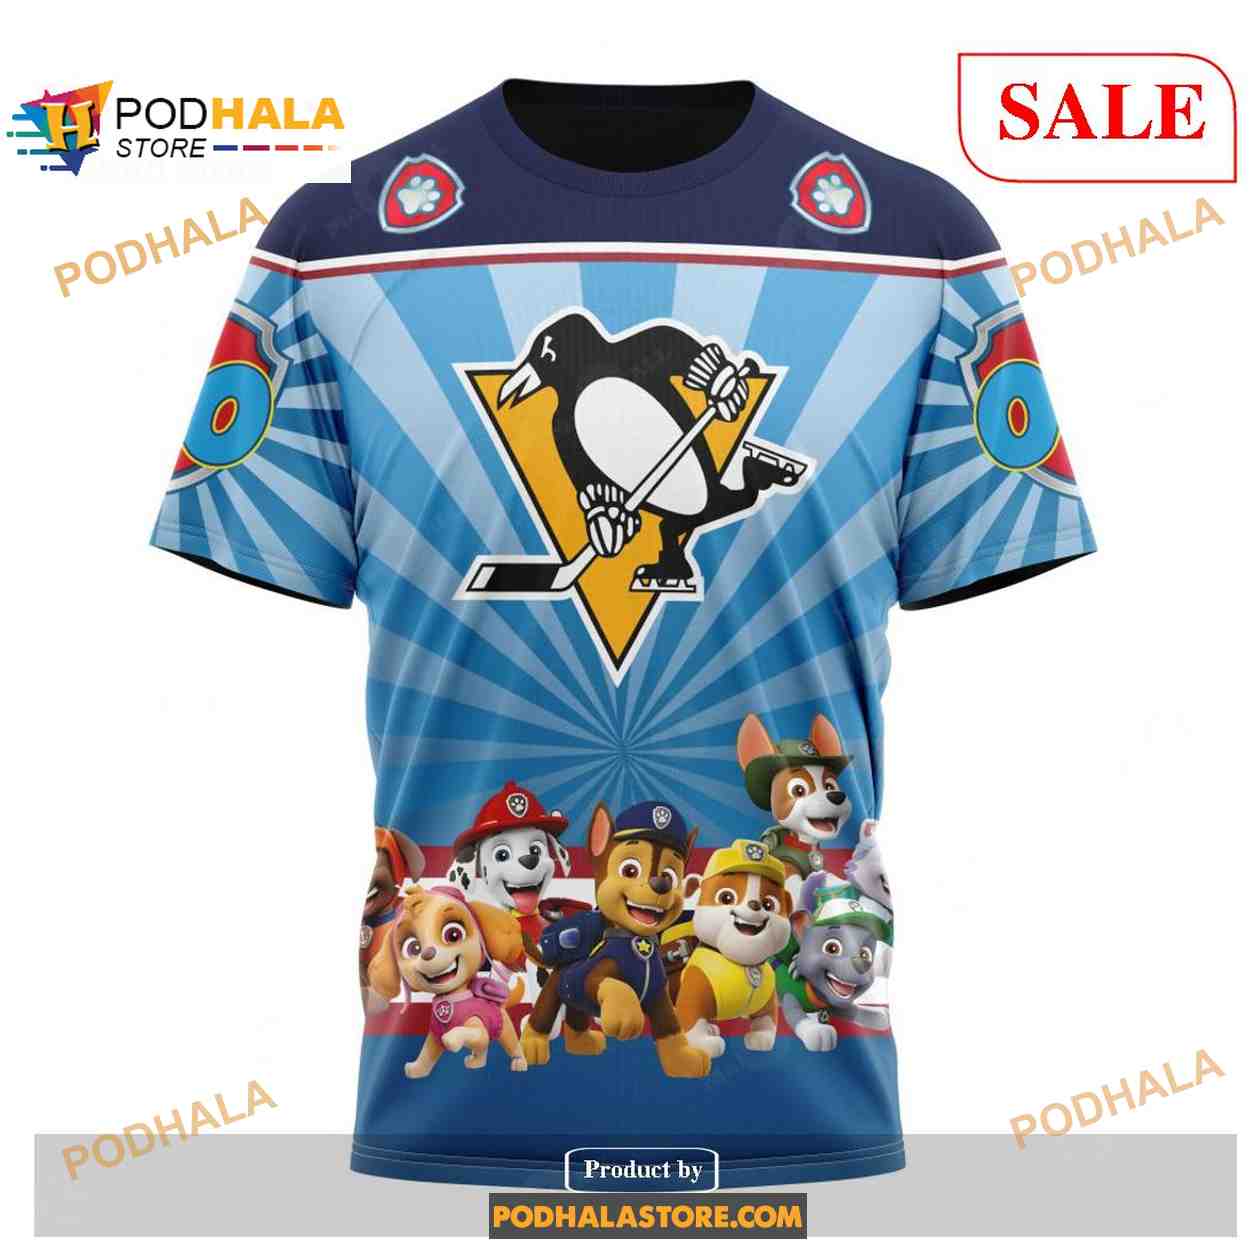 Pittsburgh Penguins T-shirt 3D cartoon graphic gift for fan